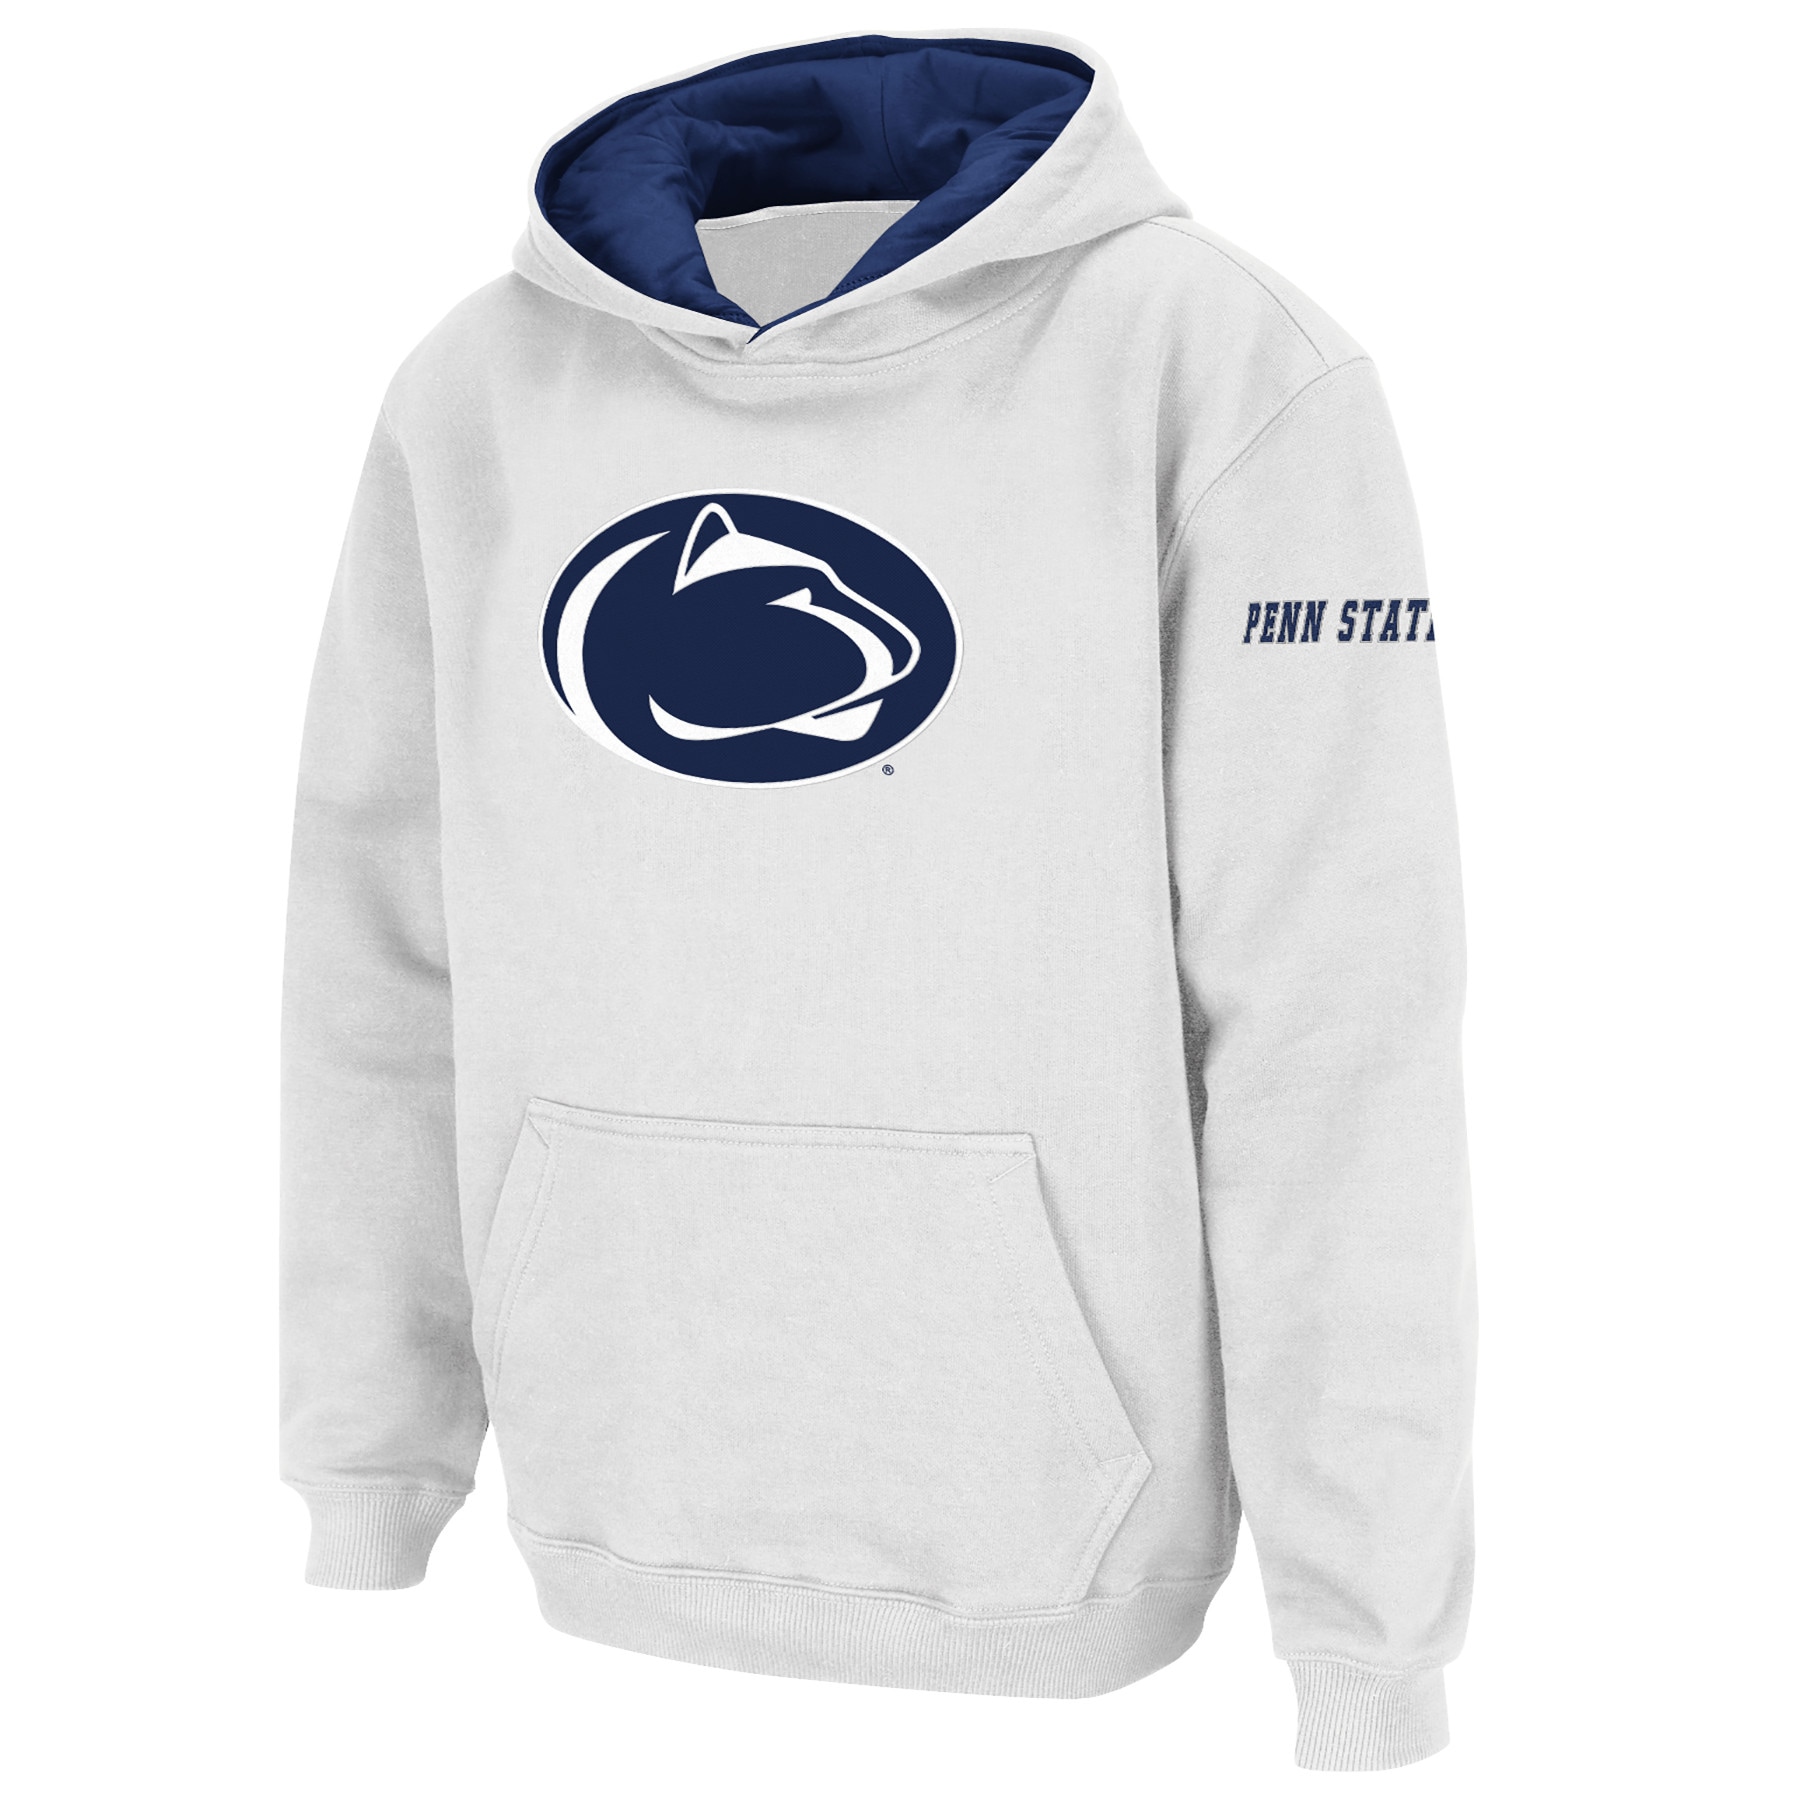 Youth Stadium Athletic White Penn State Nittany Lions Big Logo Pullover Hoodie - image 1 of 3